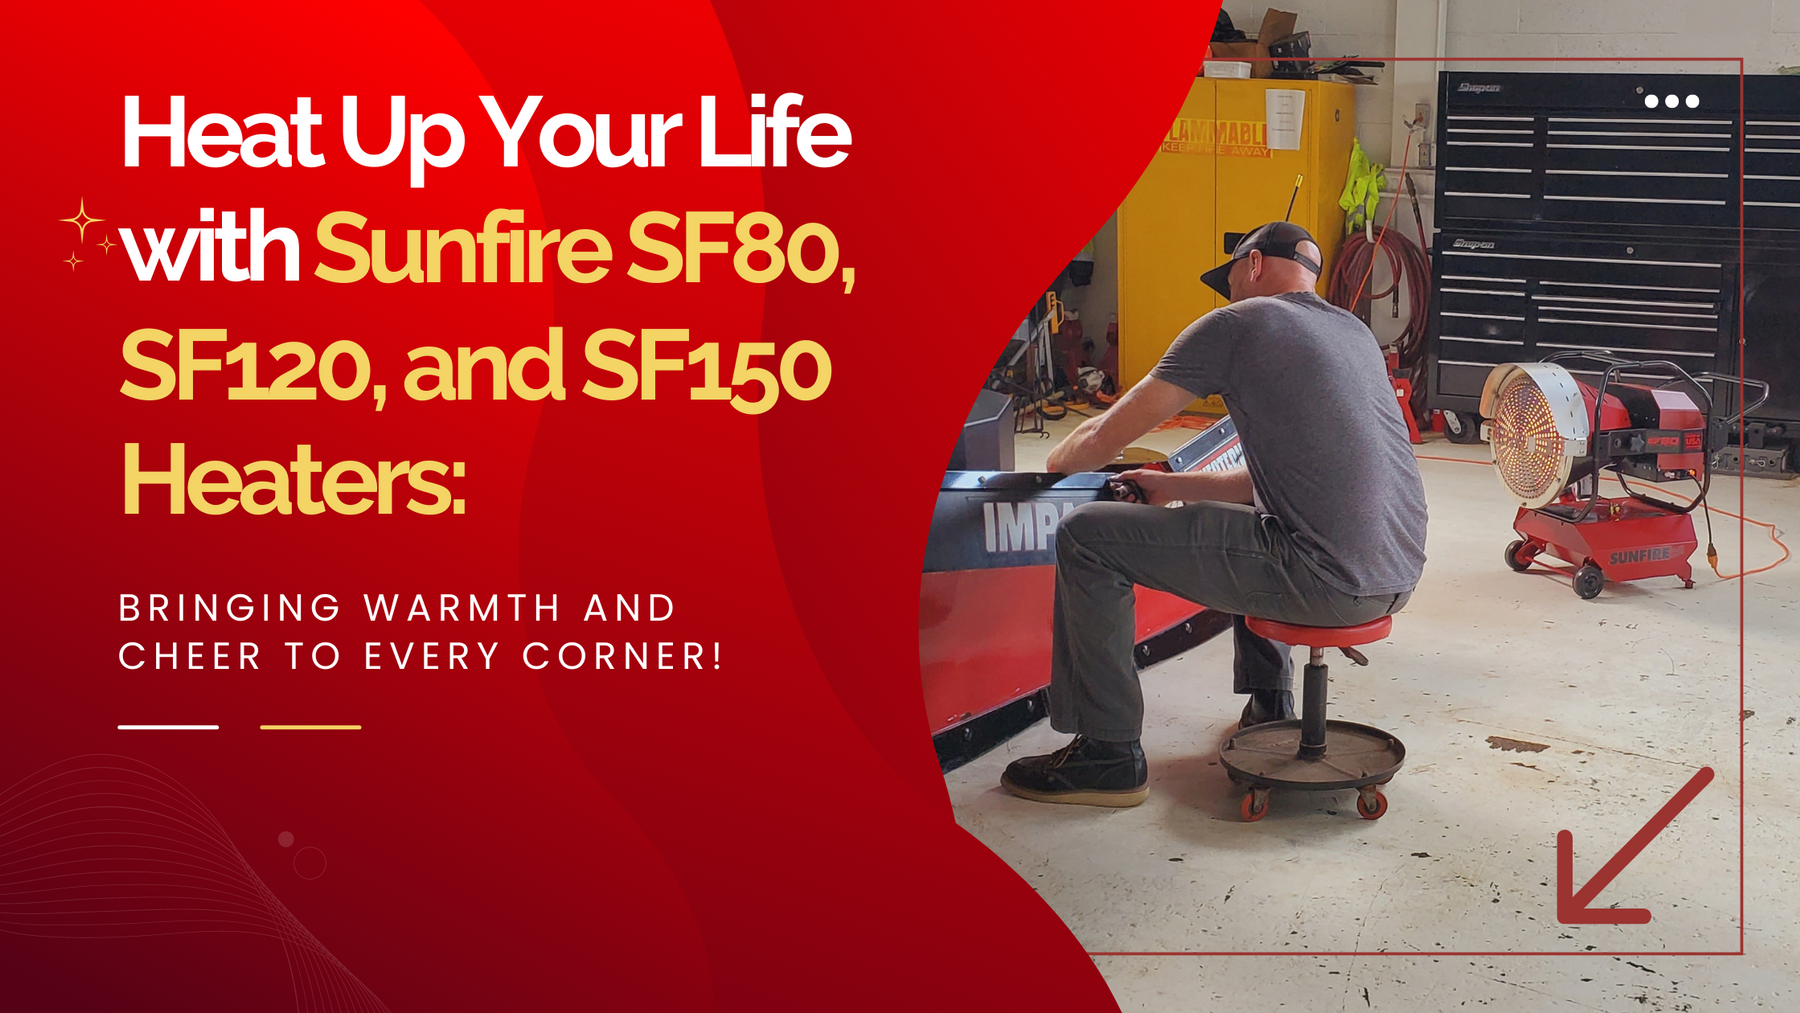 Heat Up Your Life with Sunfire SF80, SF120, and SF150 Heaters: Bringing Warmth and Cheer to Every Corner!